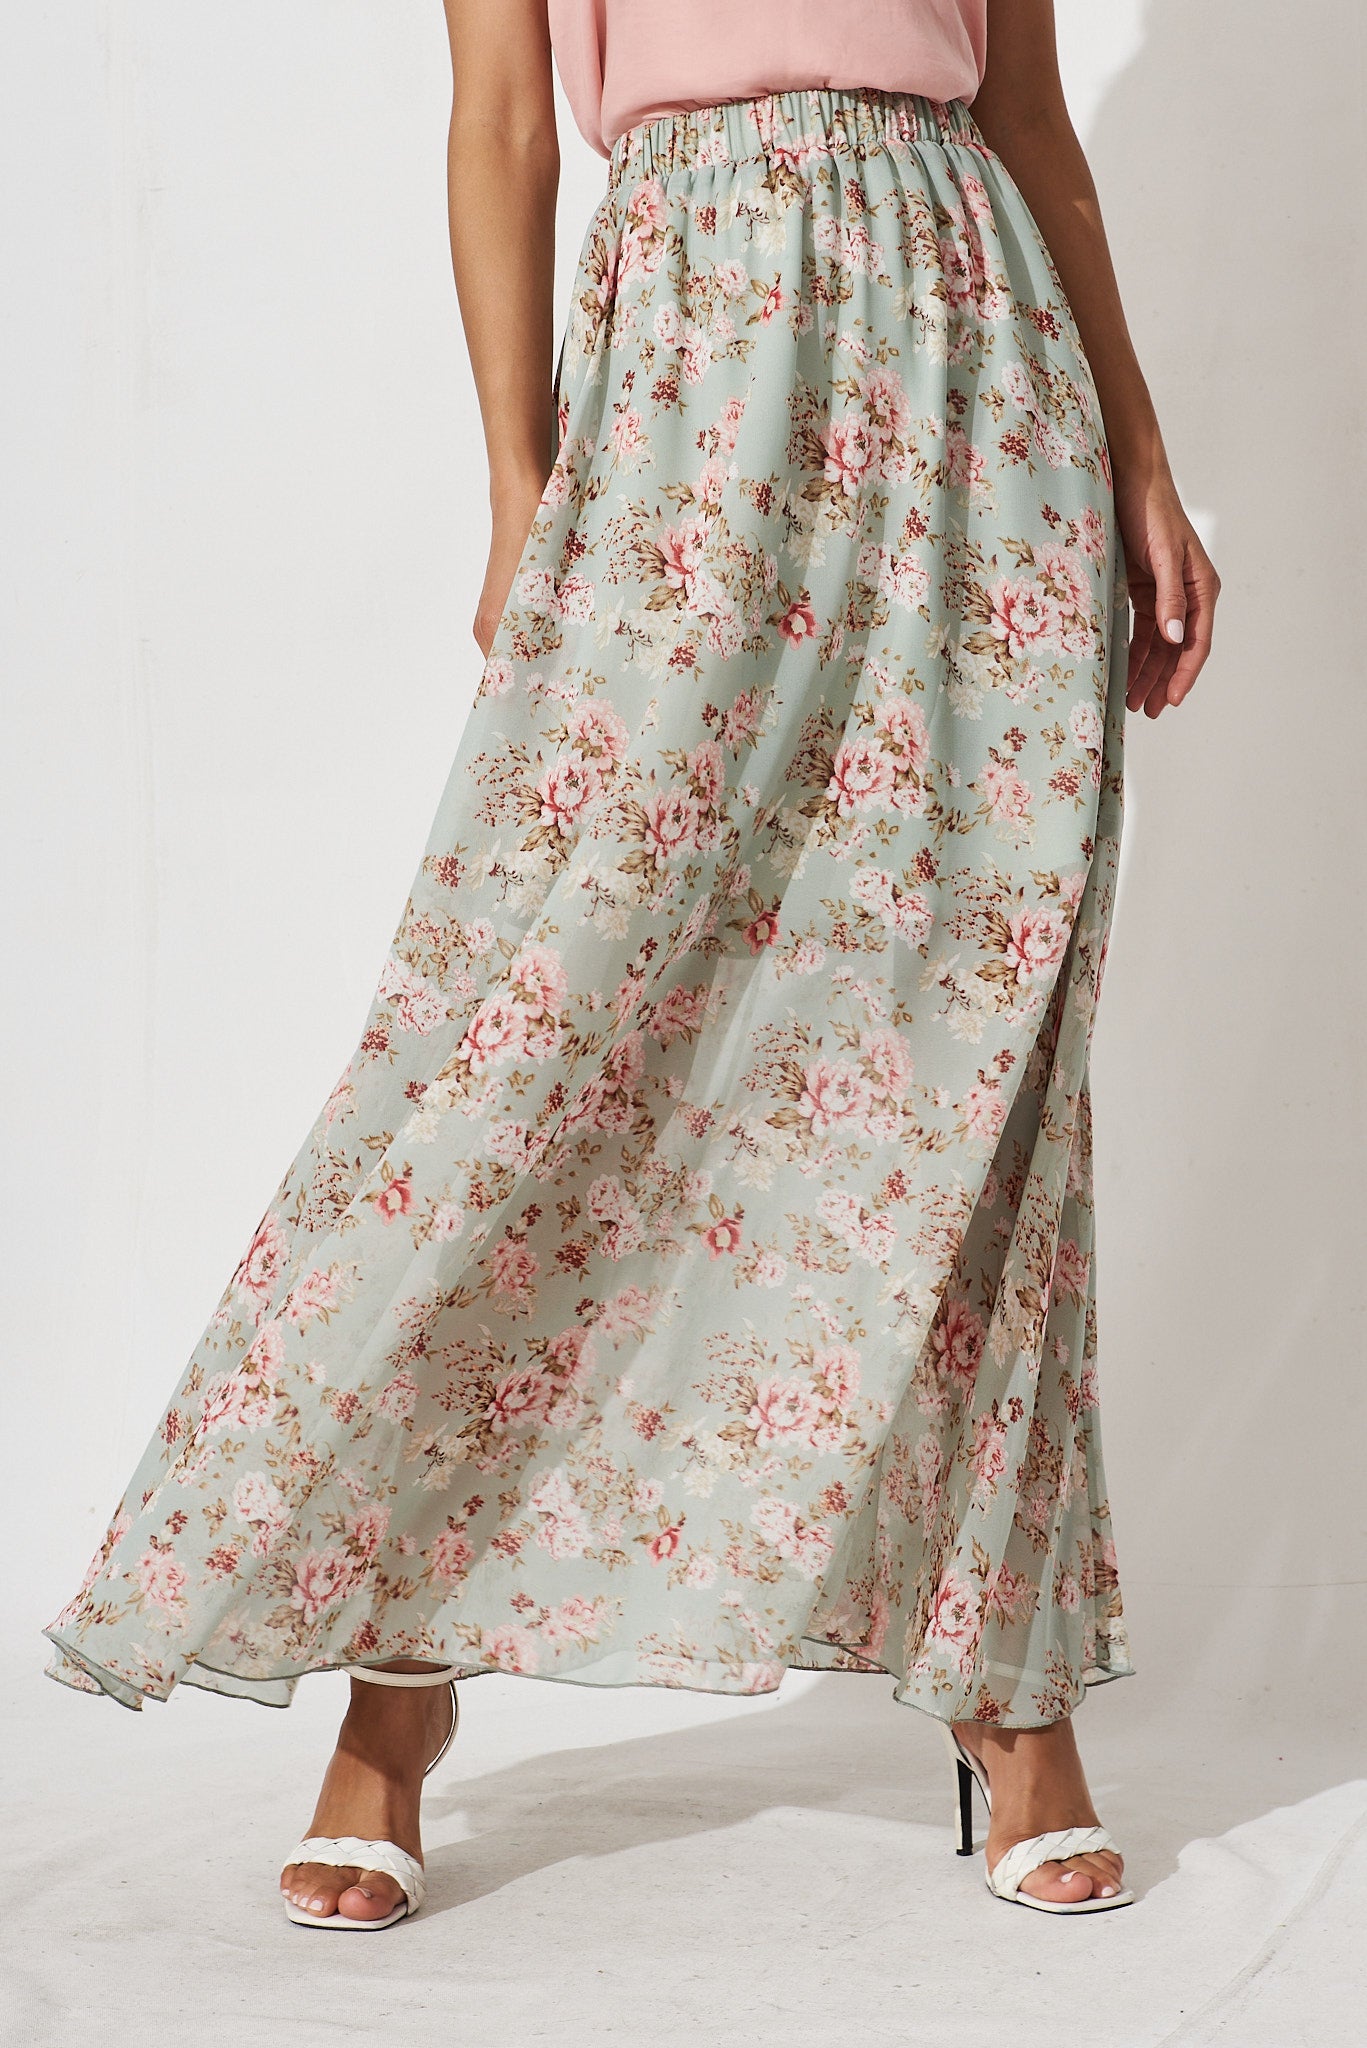 Mirima Maxi Skirt In Mint With Blush Floral Chiffon - front